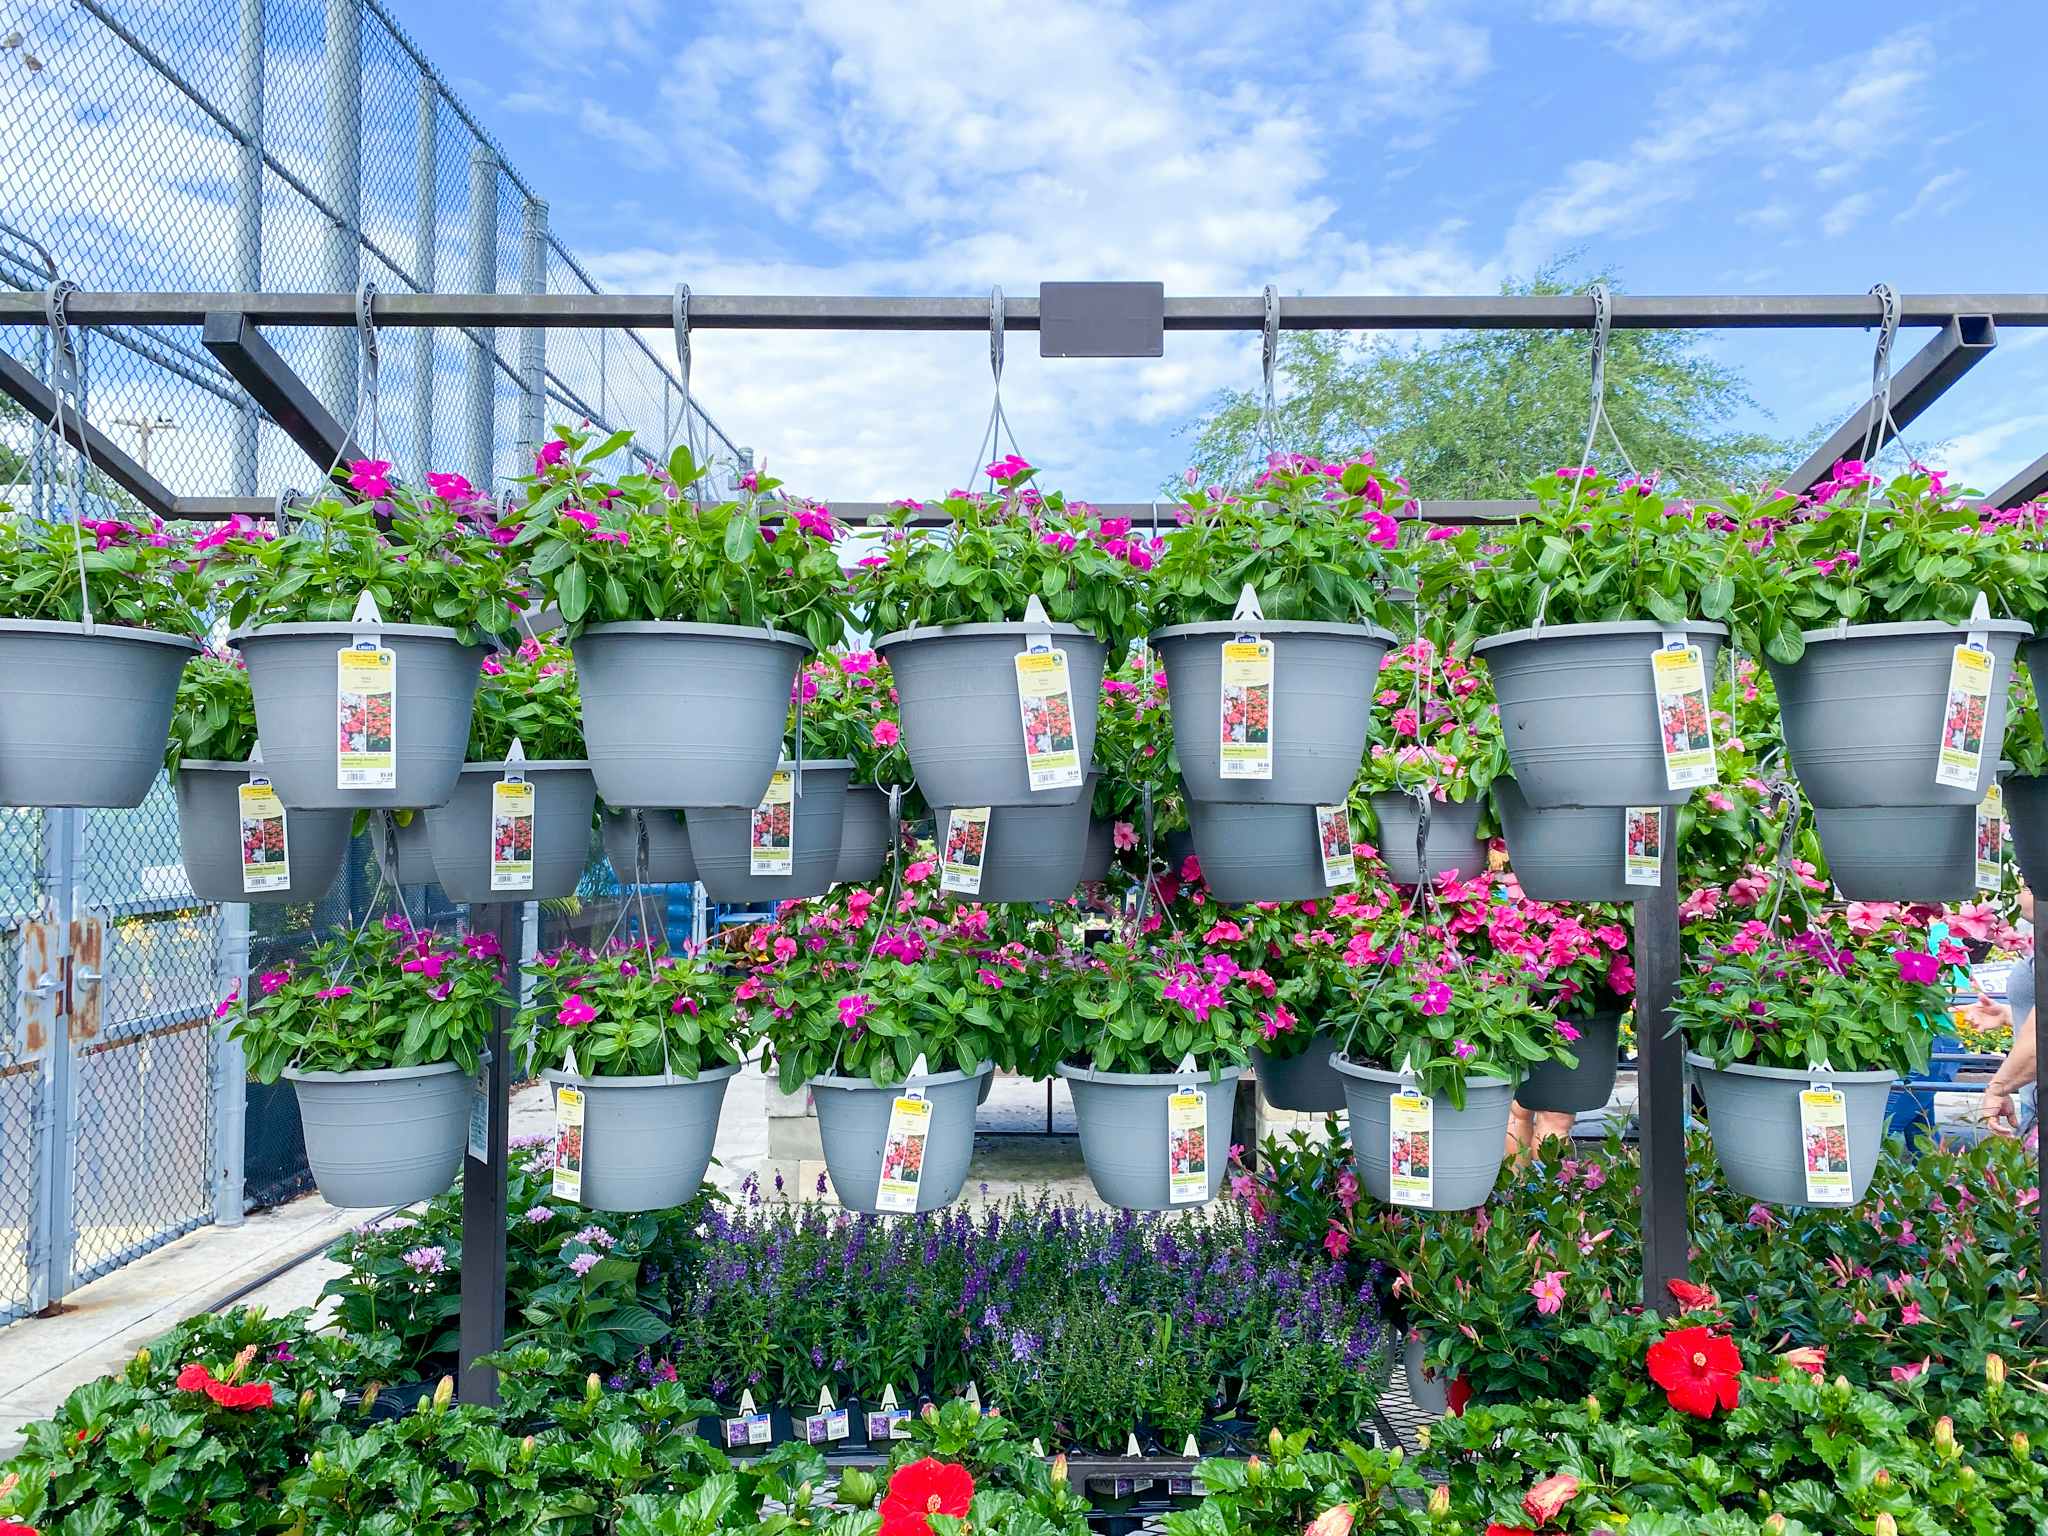 rows of hanging flower baskets